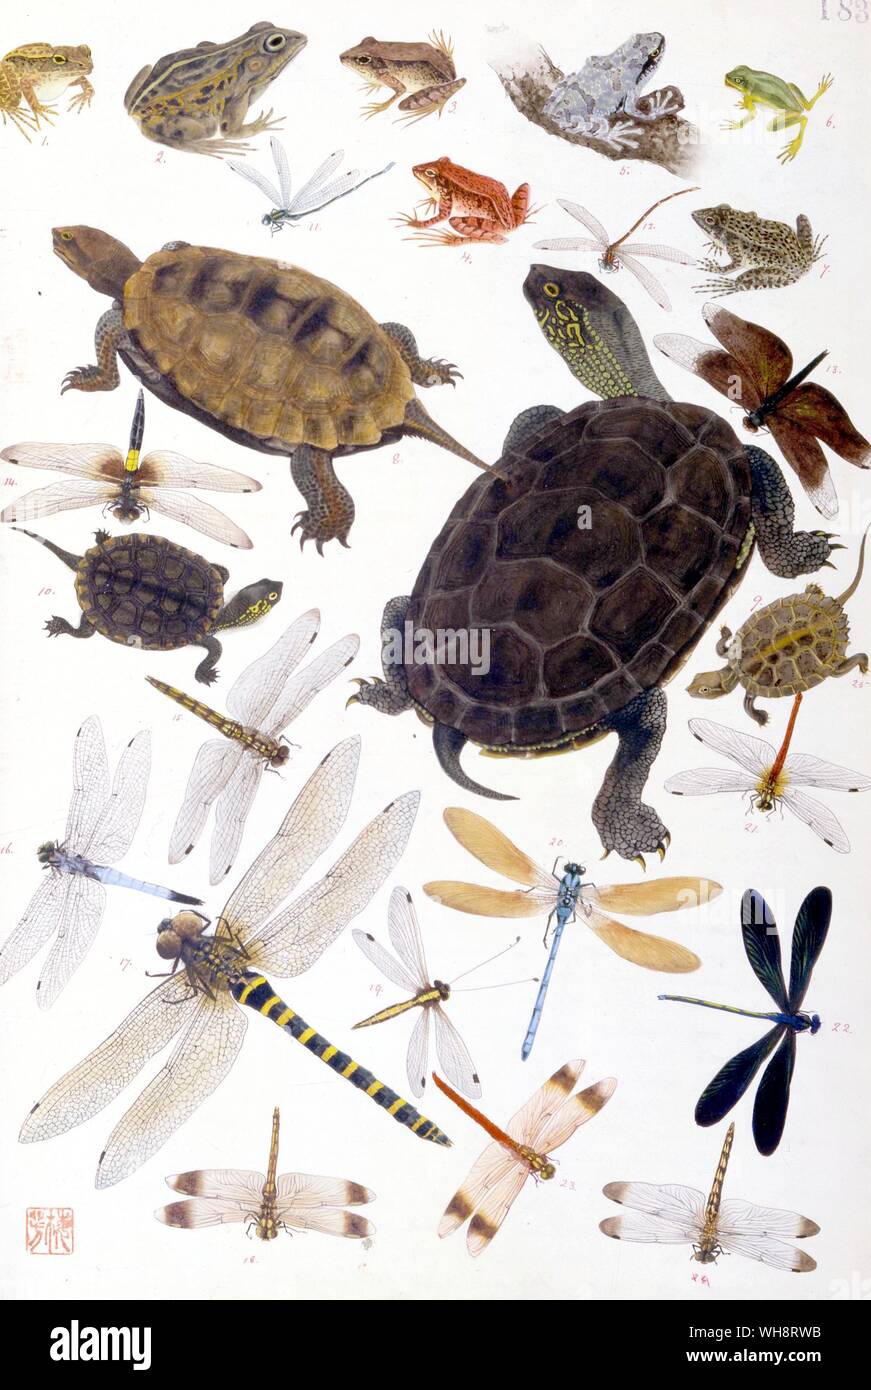 Japanese turtles, frogs and dragonflies. Stock Photo